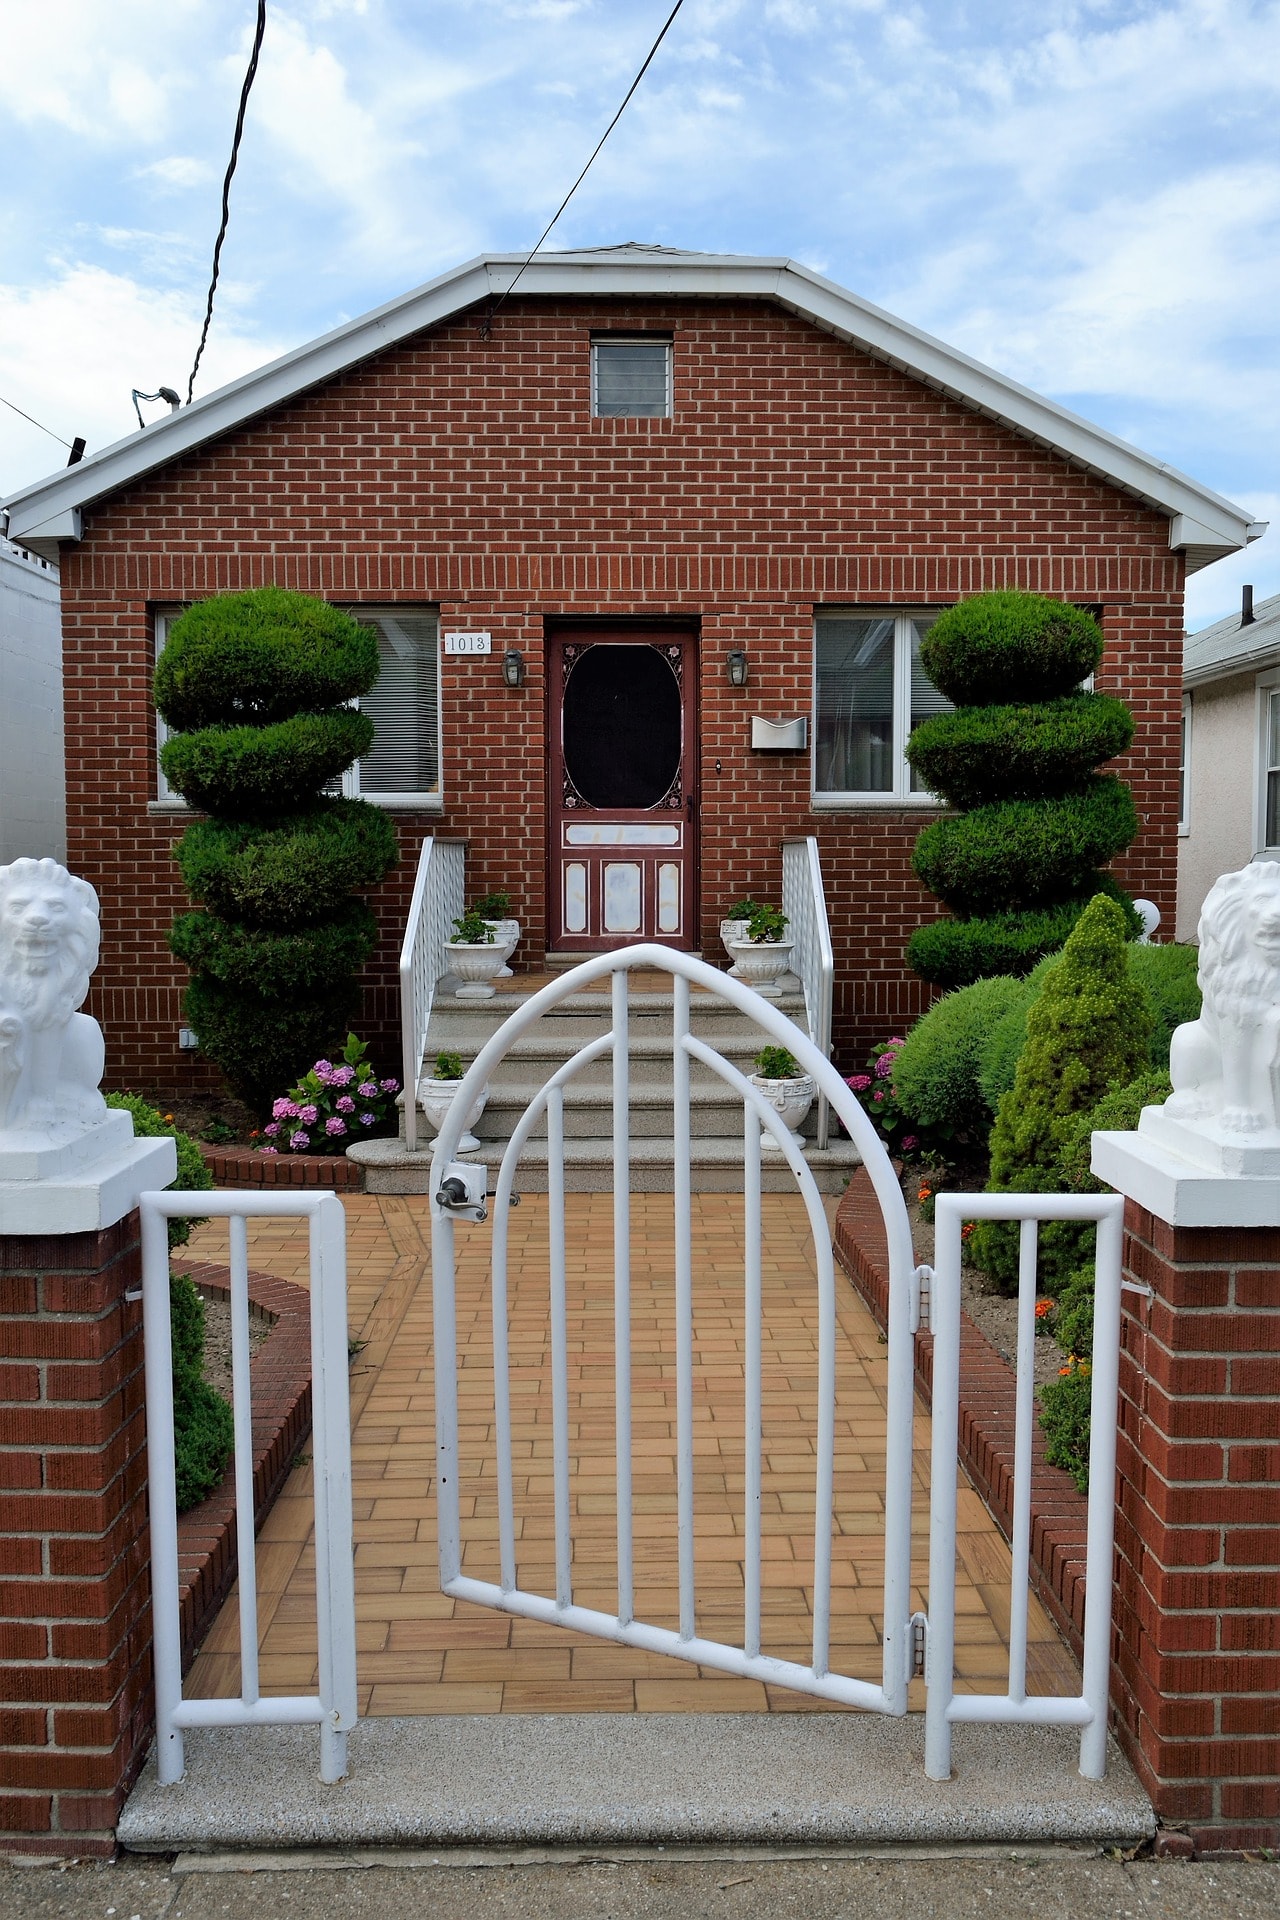 A one story brick structured house with white gate